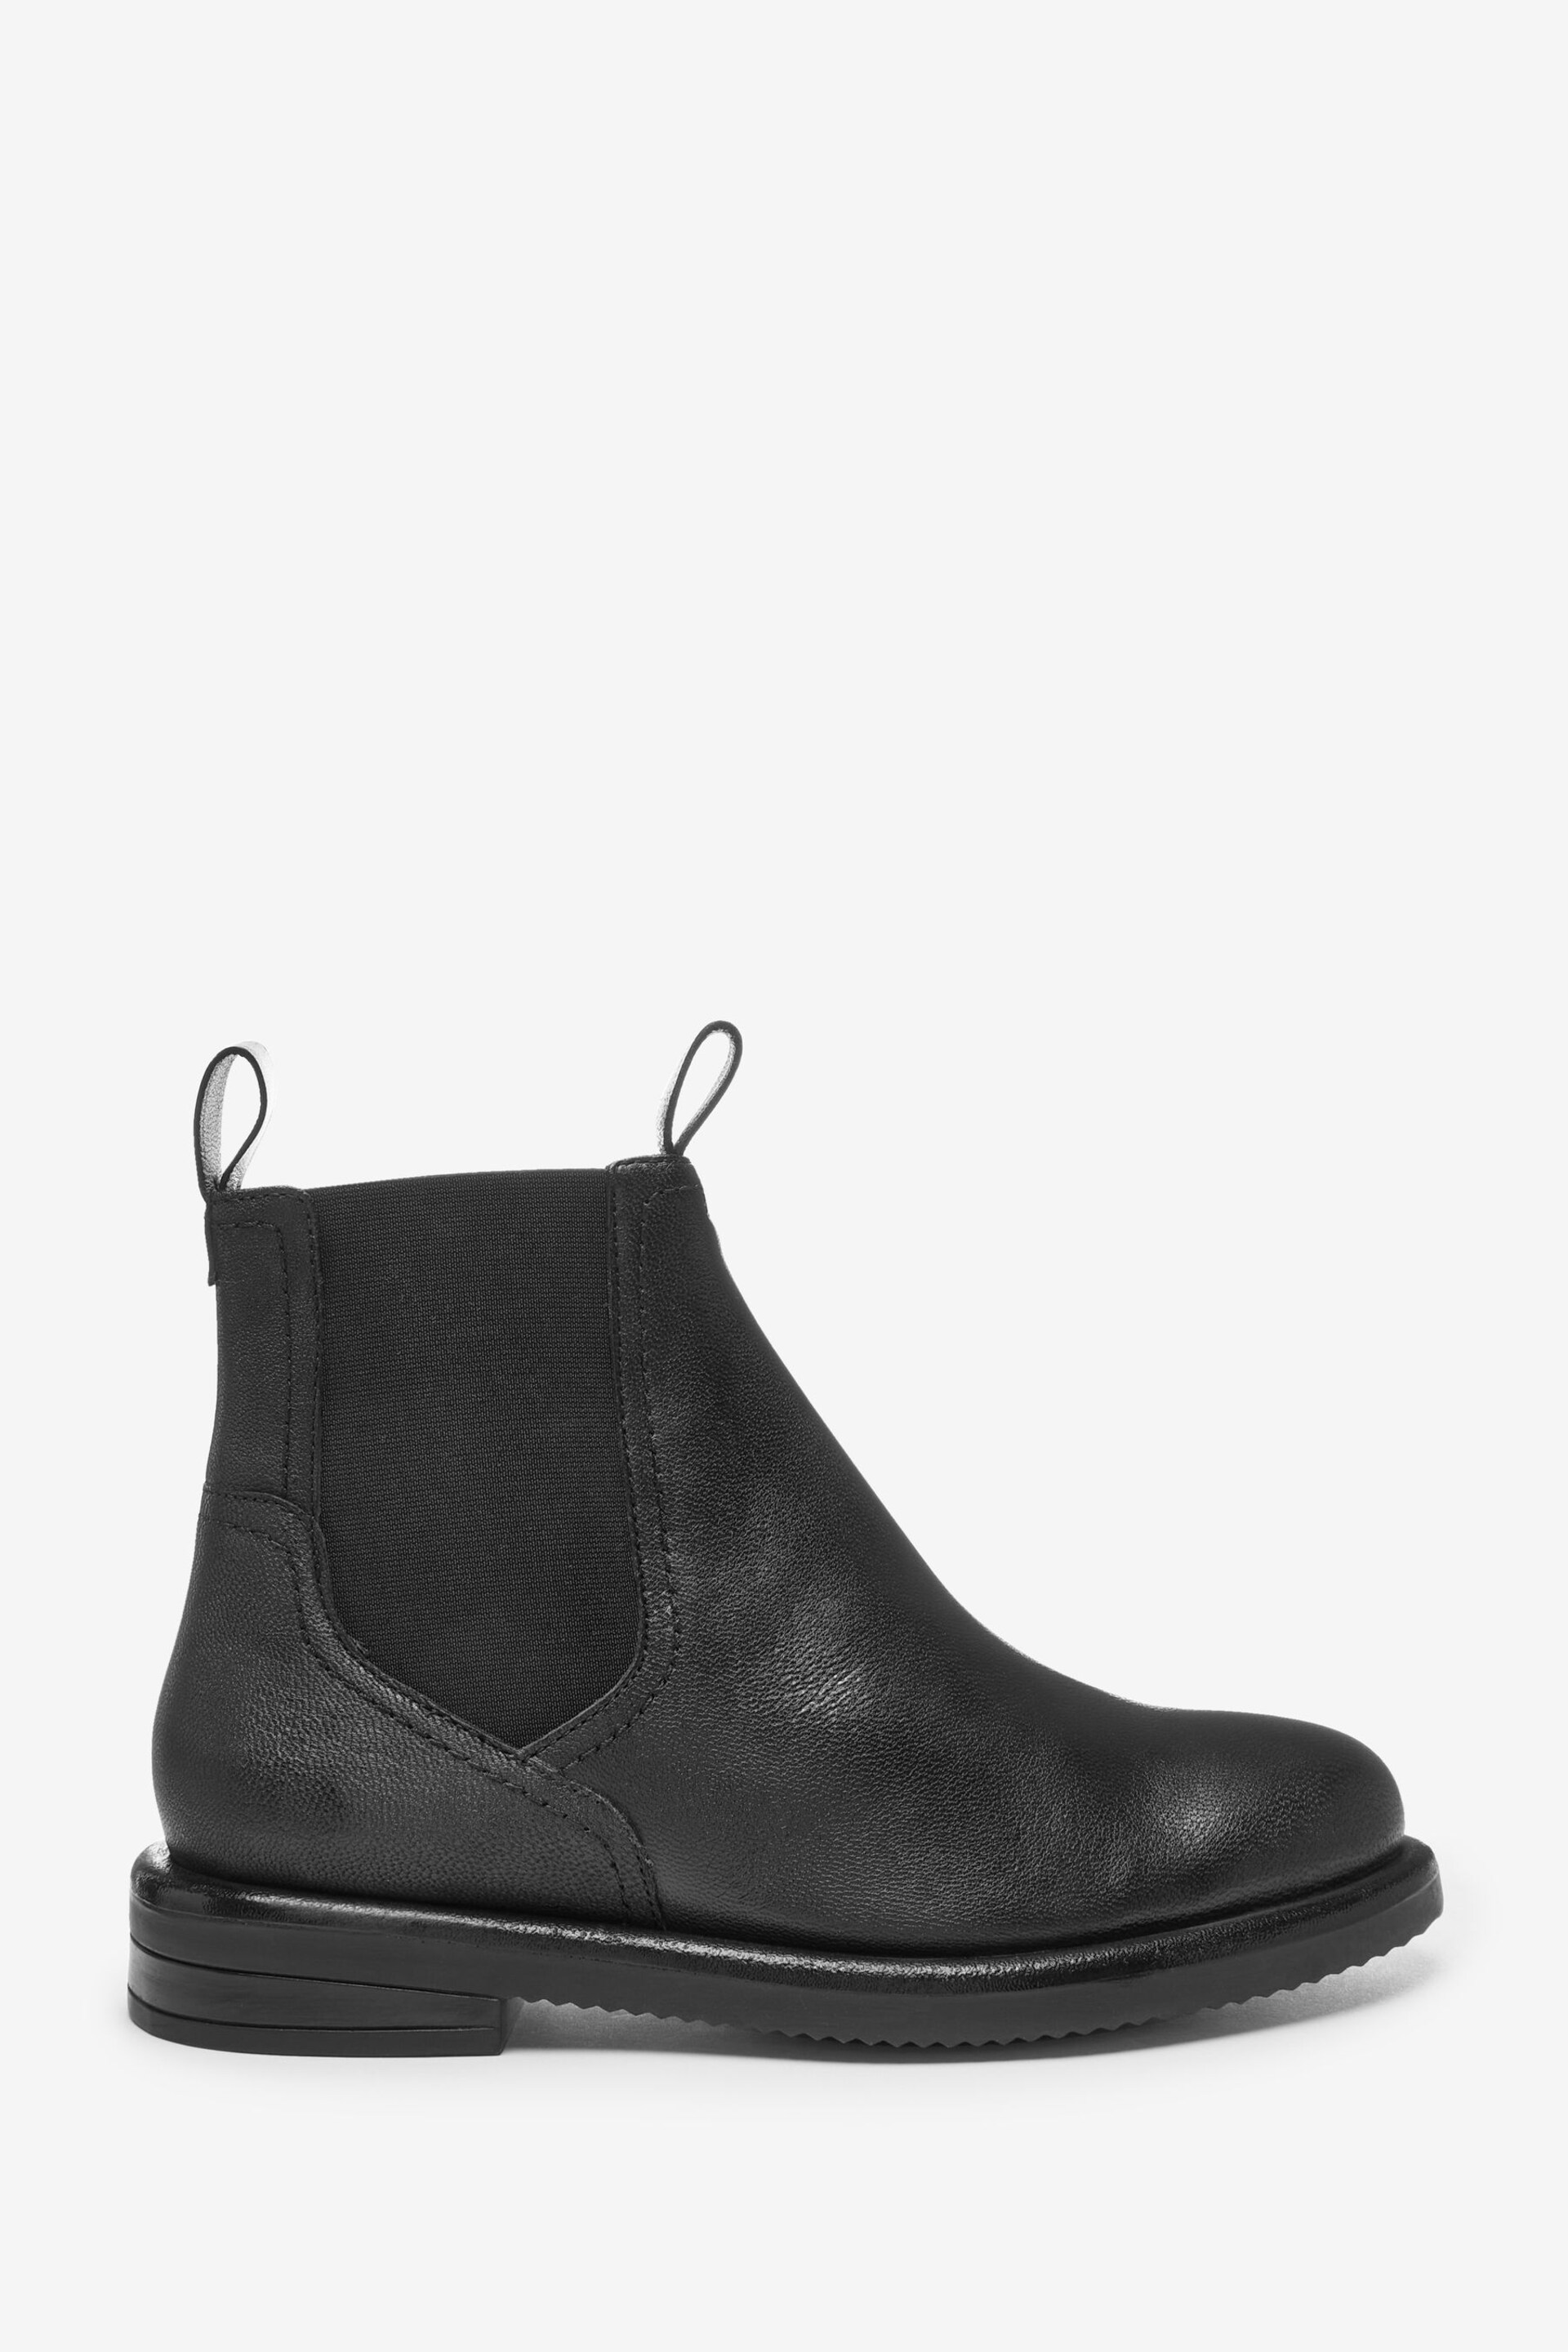 Black Extra Wide Fit Forever Comfort® Leather Chelsea Boots - Image 1 of 3